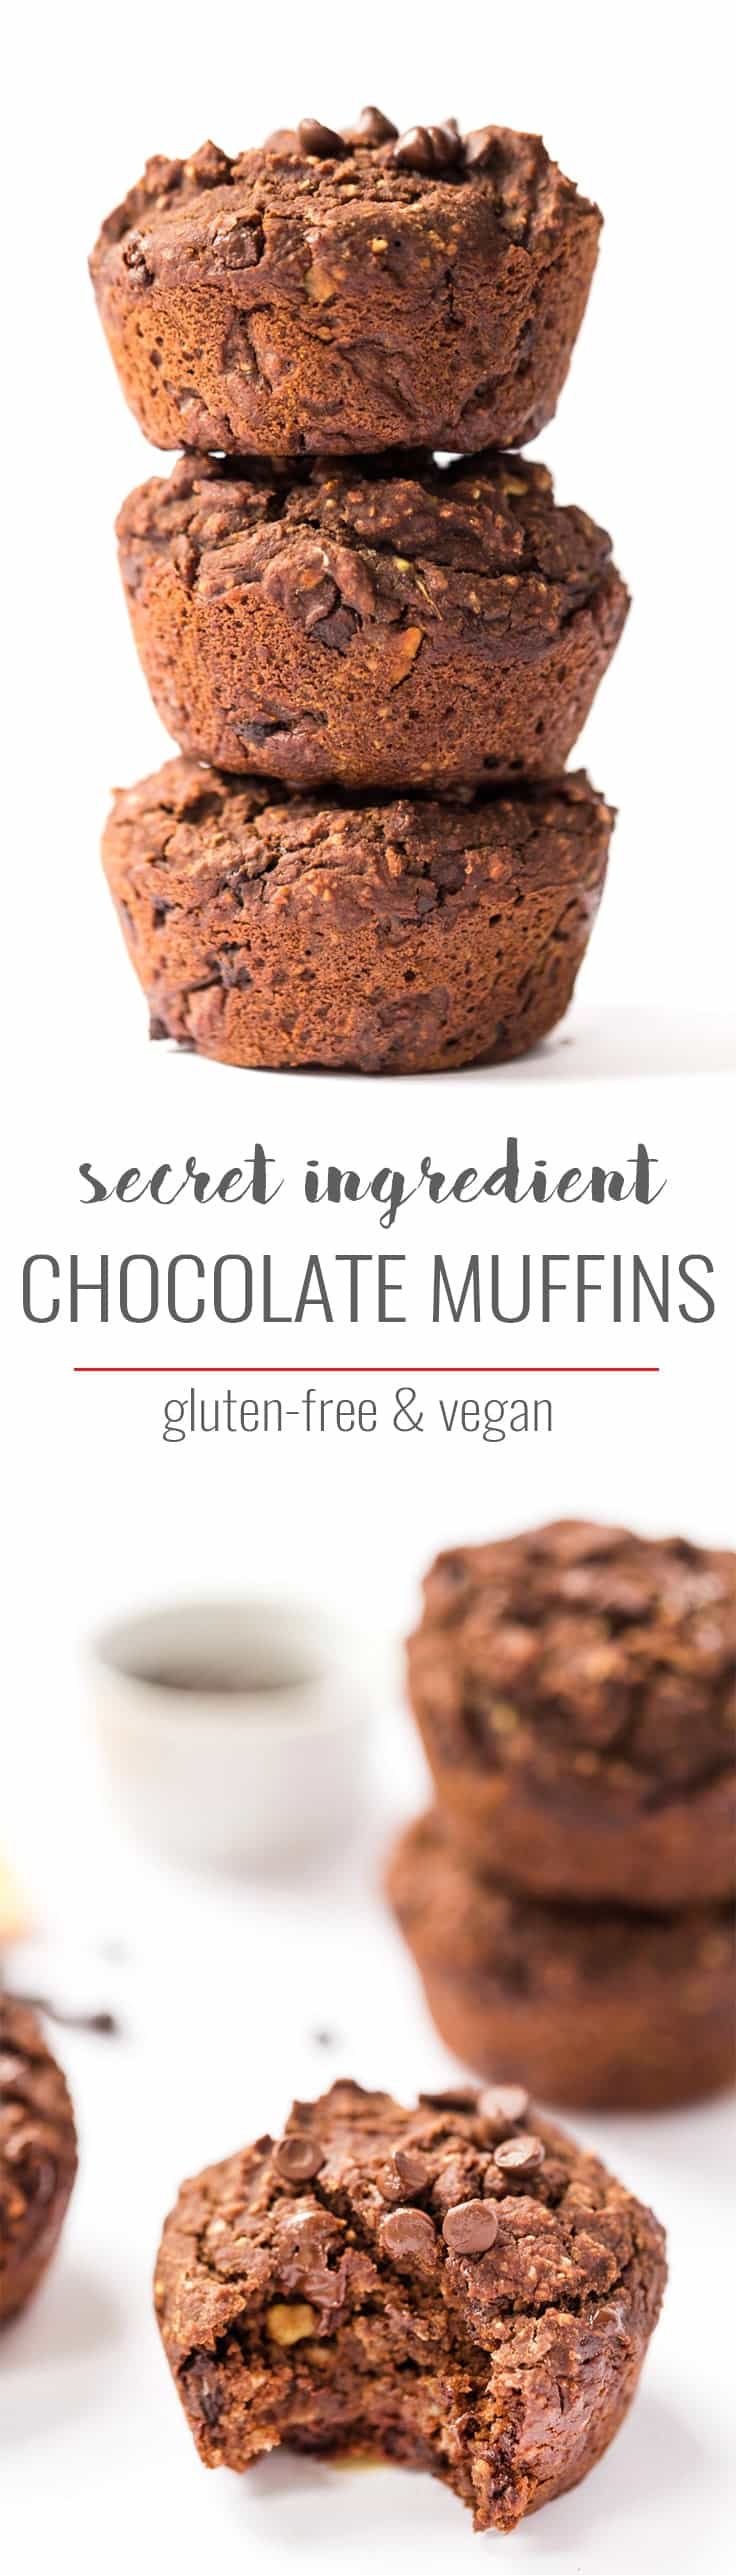 These healthy DOUBLE CHOCOLATE Muffins are vegan, gluten-free and made with a secret ingredient that makes them full of fiber and naturally sweet!